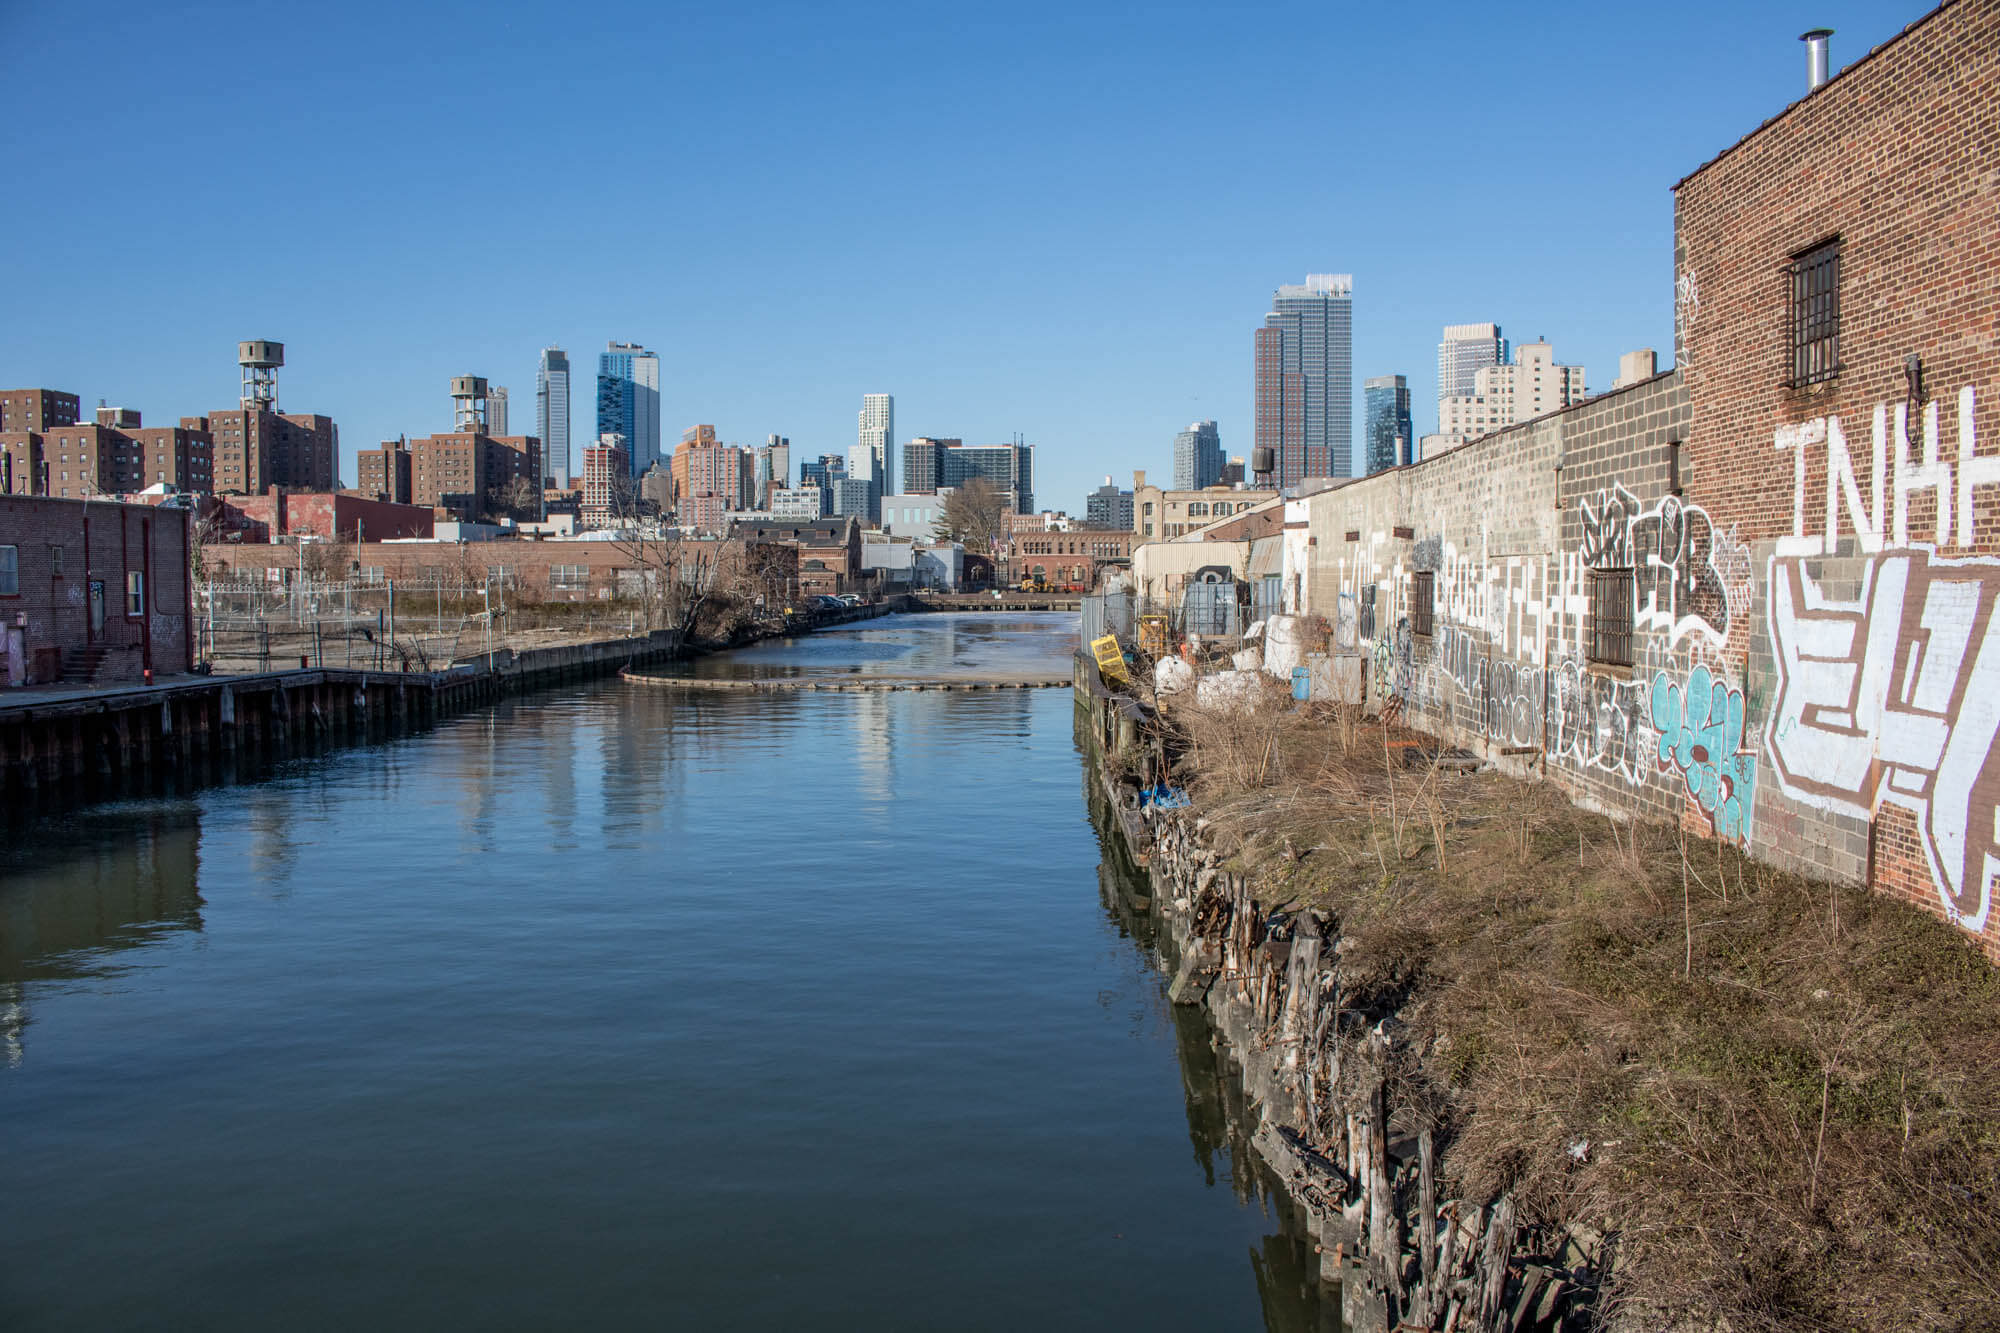 View of the Gowanus Canal from the Union Street Bridge. Photo by Susan De Vries